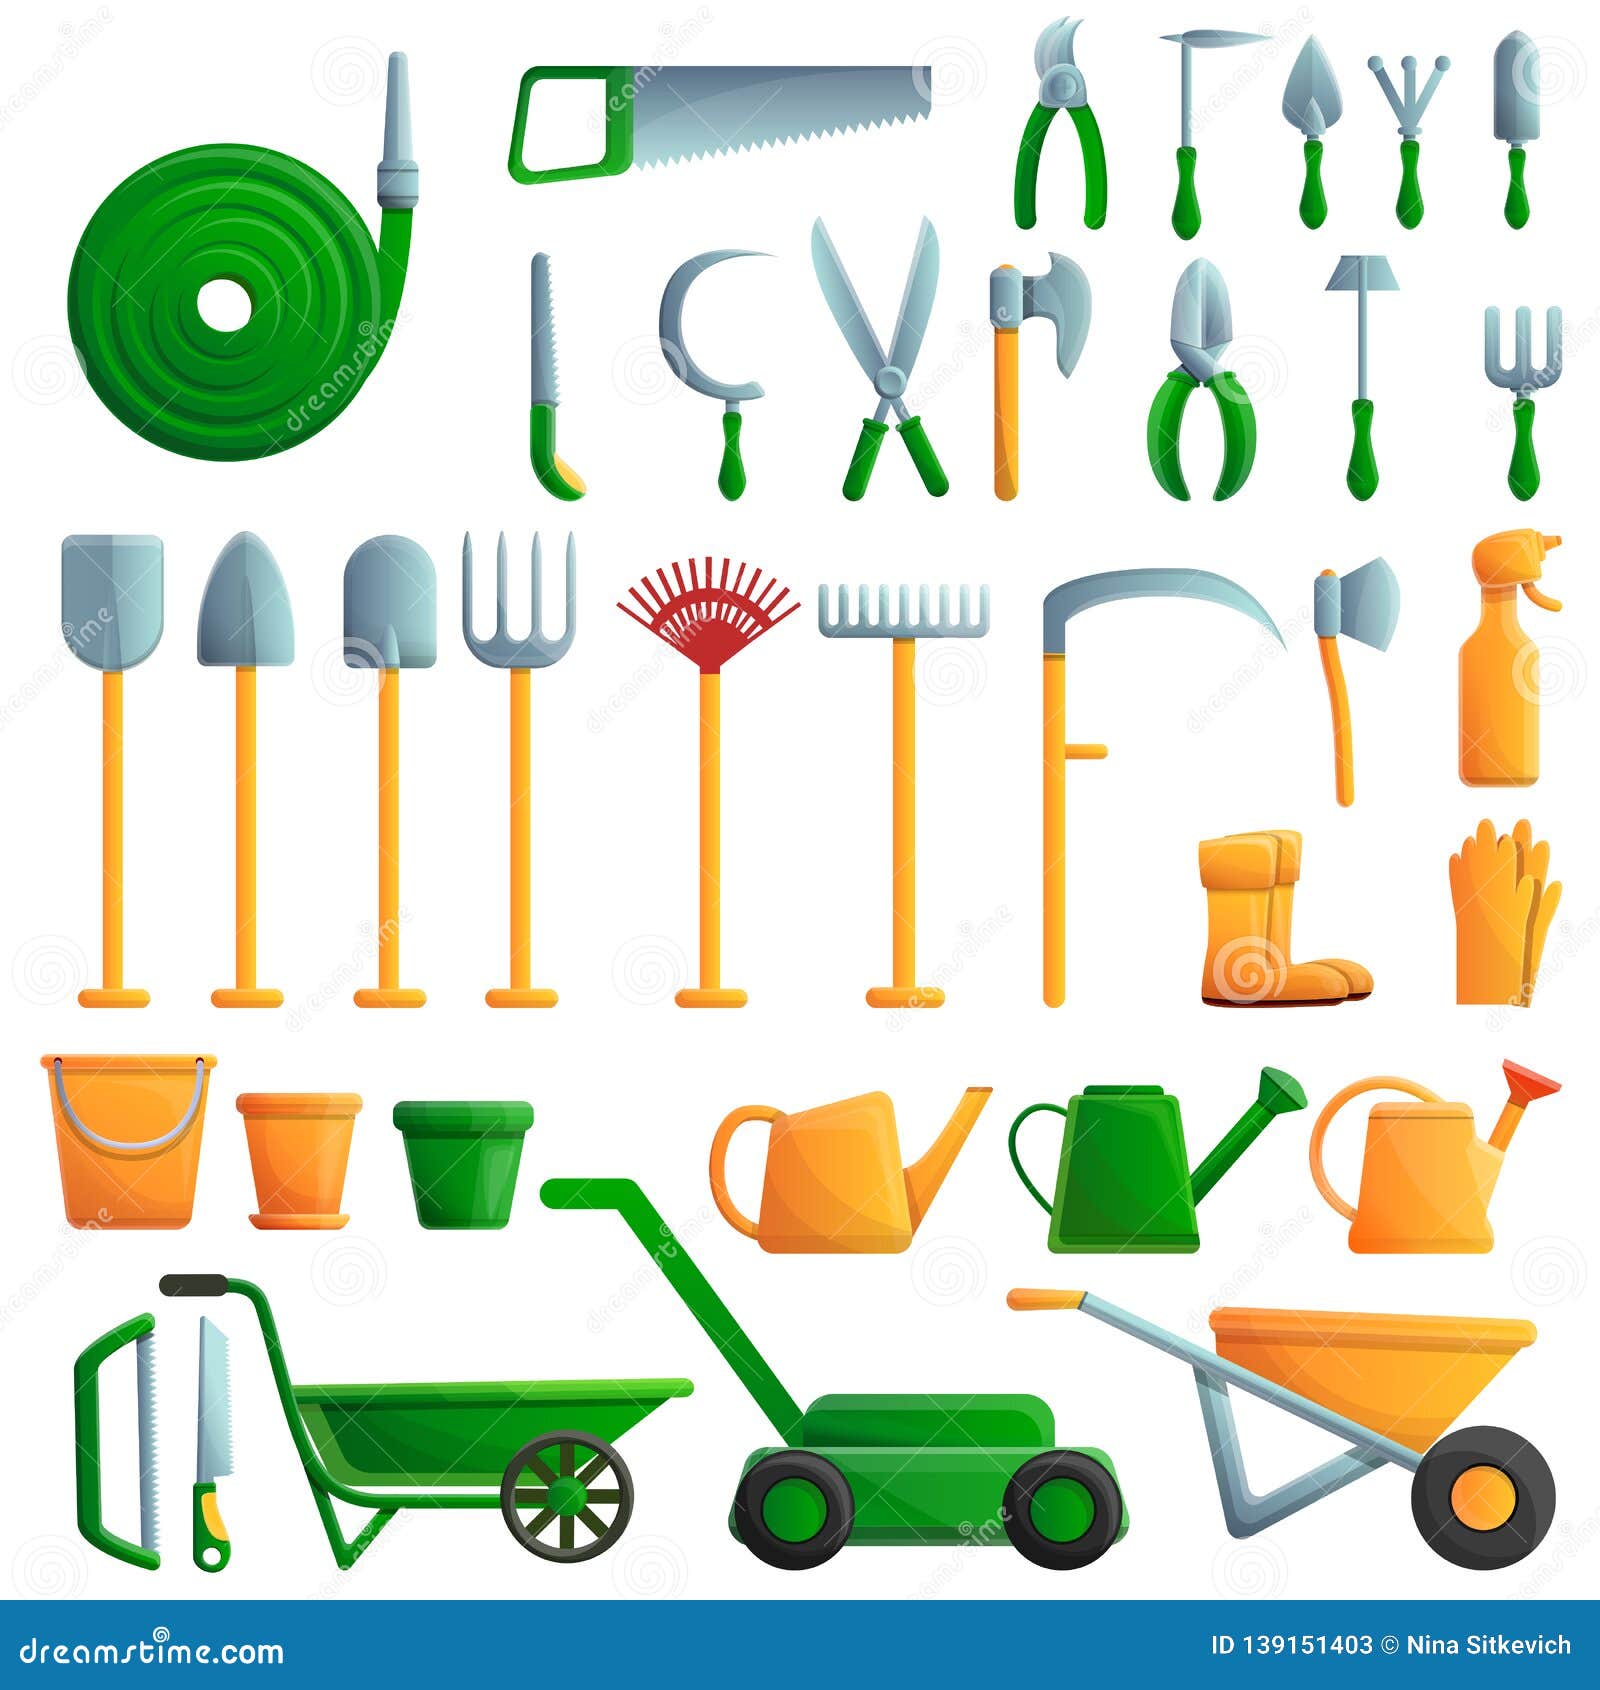 Set of neon garden tools and accessories icon Vector Image